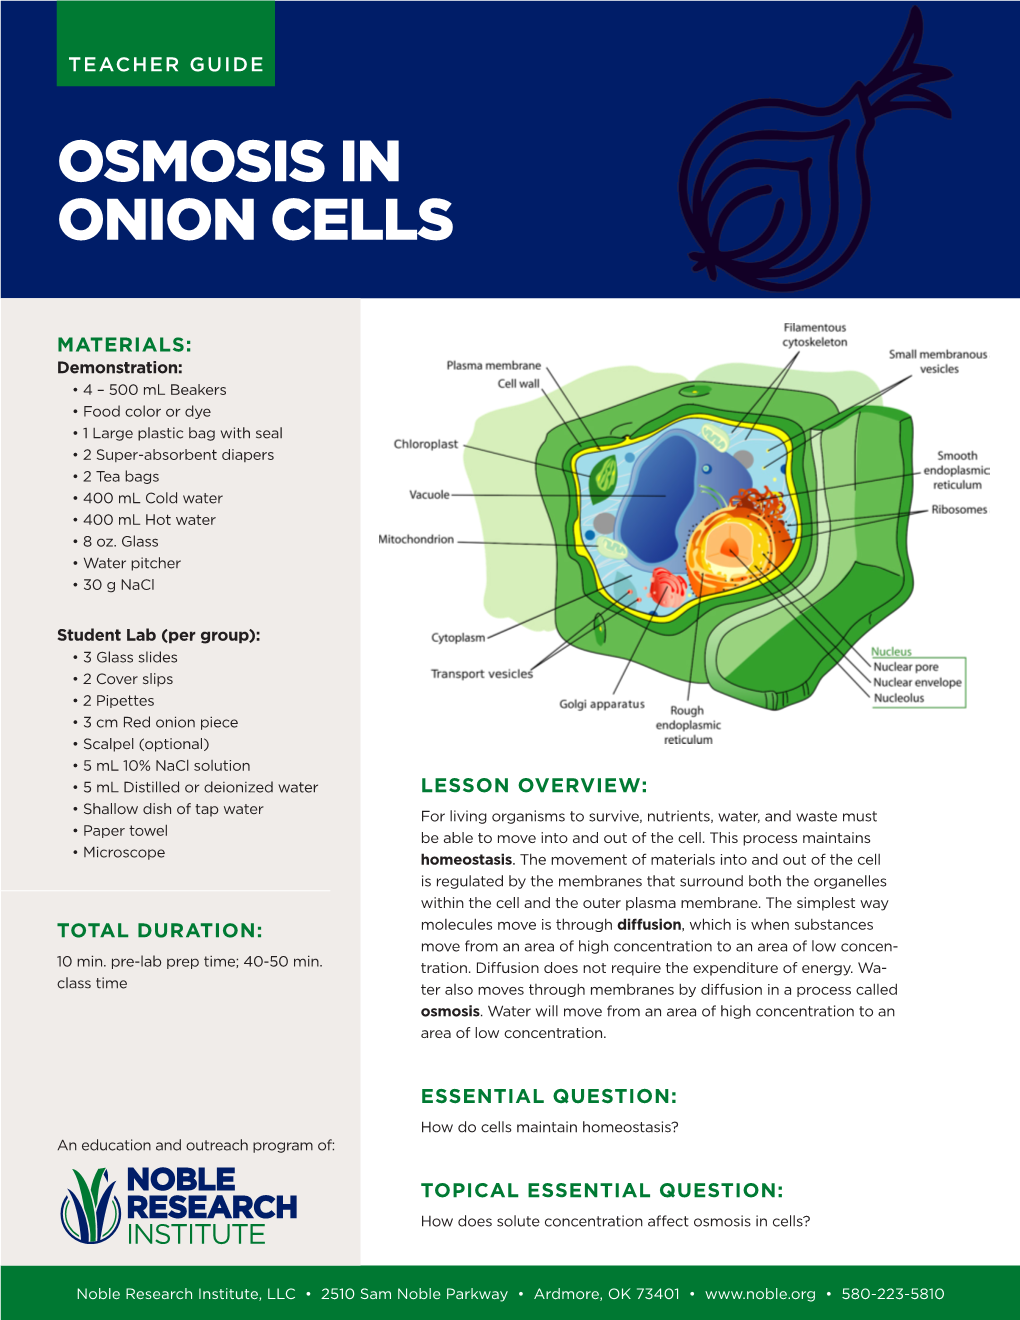 Osmosis in Onion Cells